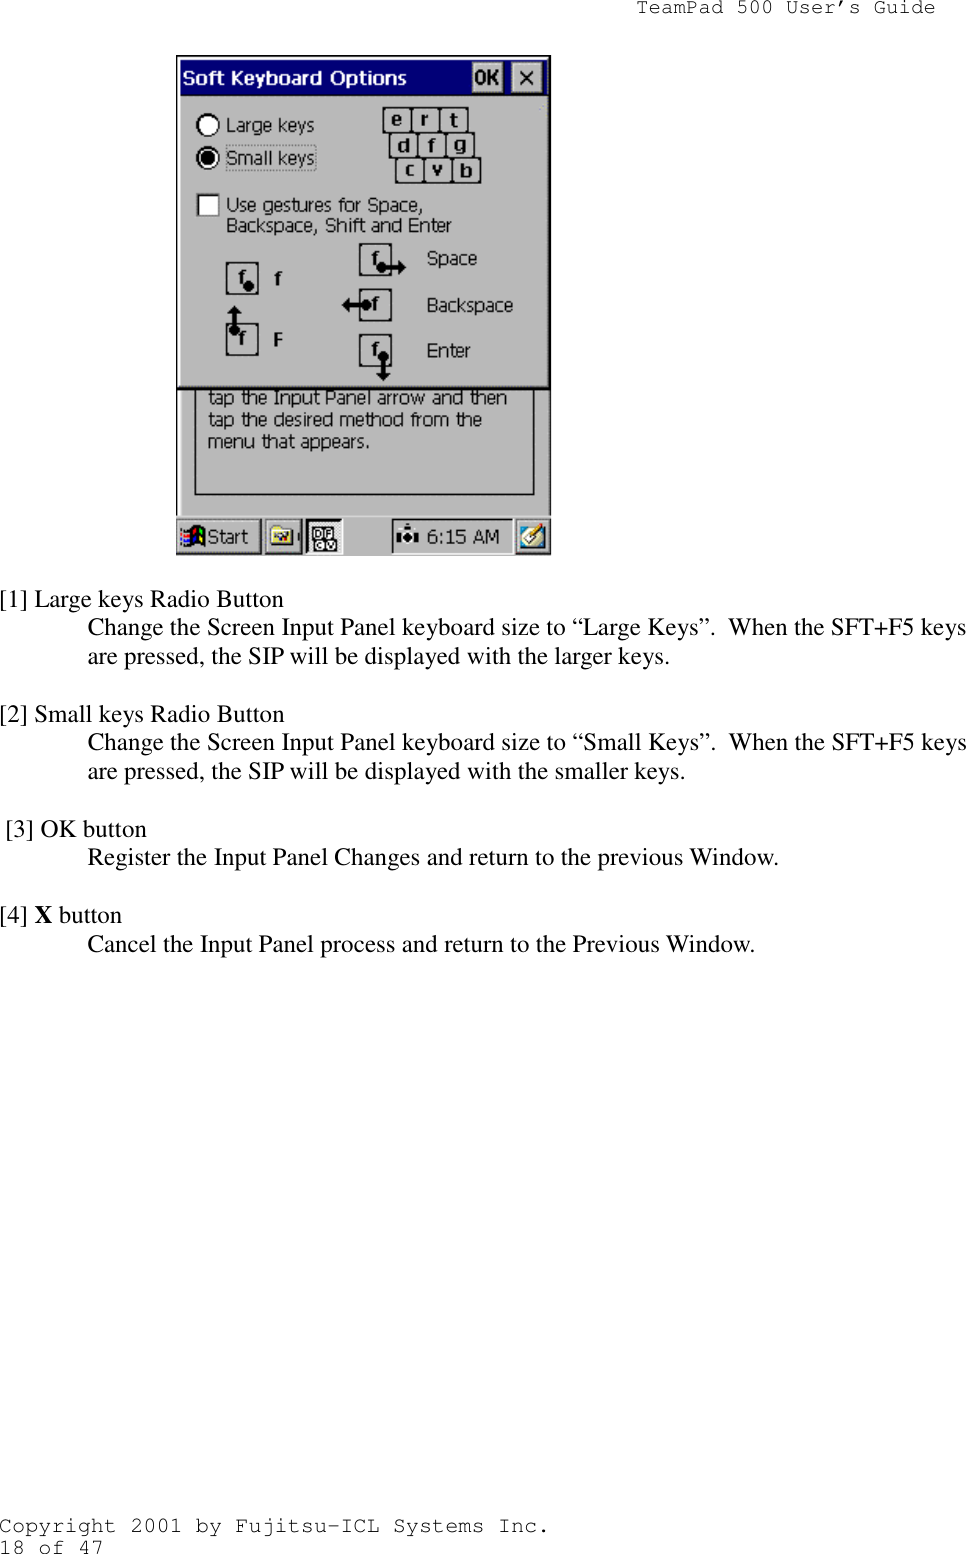                TeamPad 500 User’s GuideCopyright 2001 by Fujitsu-ICL Systems Inc.18 of 47[1] Large keys Radio ButtonChange the Screen Input Panel keyboard size to “Large Keys”.  When the SFT+F5 keysare pressed, the SIP will be displayed with the larger keys.[2] Small keys Radio ButtonChange the Screen Input Panel keyboard size to “Small Keys”.  When the SFT+F5 keysare pressed, the SIP will be displayed with the smaller keys. [3] OK buttonRegister the Input Panel Changes and return to the previous Window.[4] X buttonCancel the Input Panel process and return to the Previous Window.